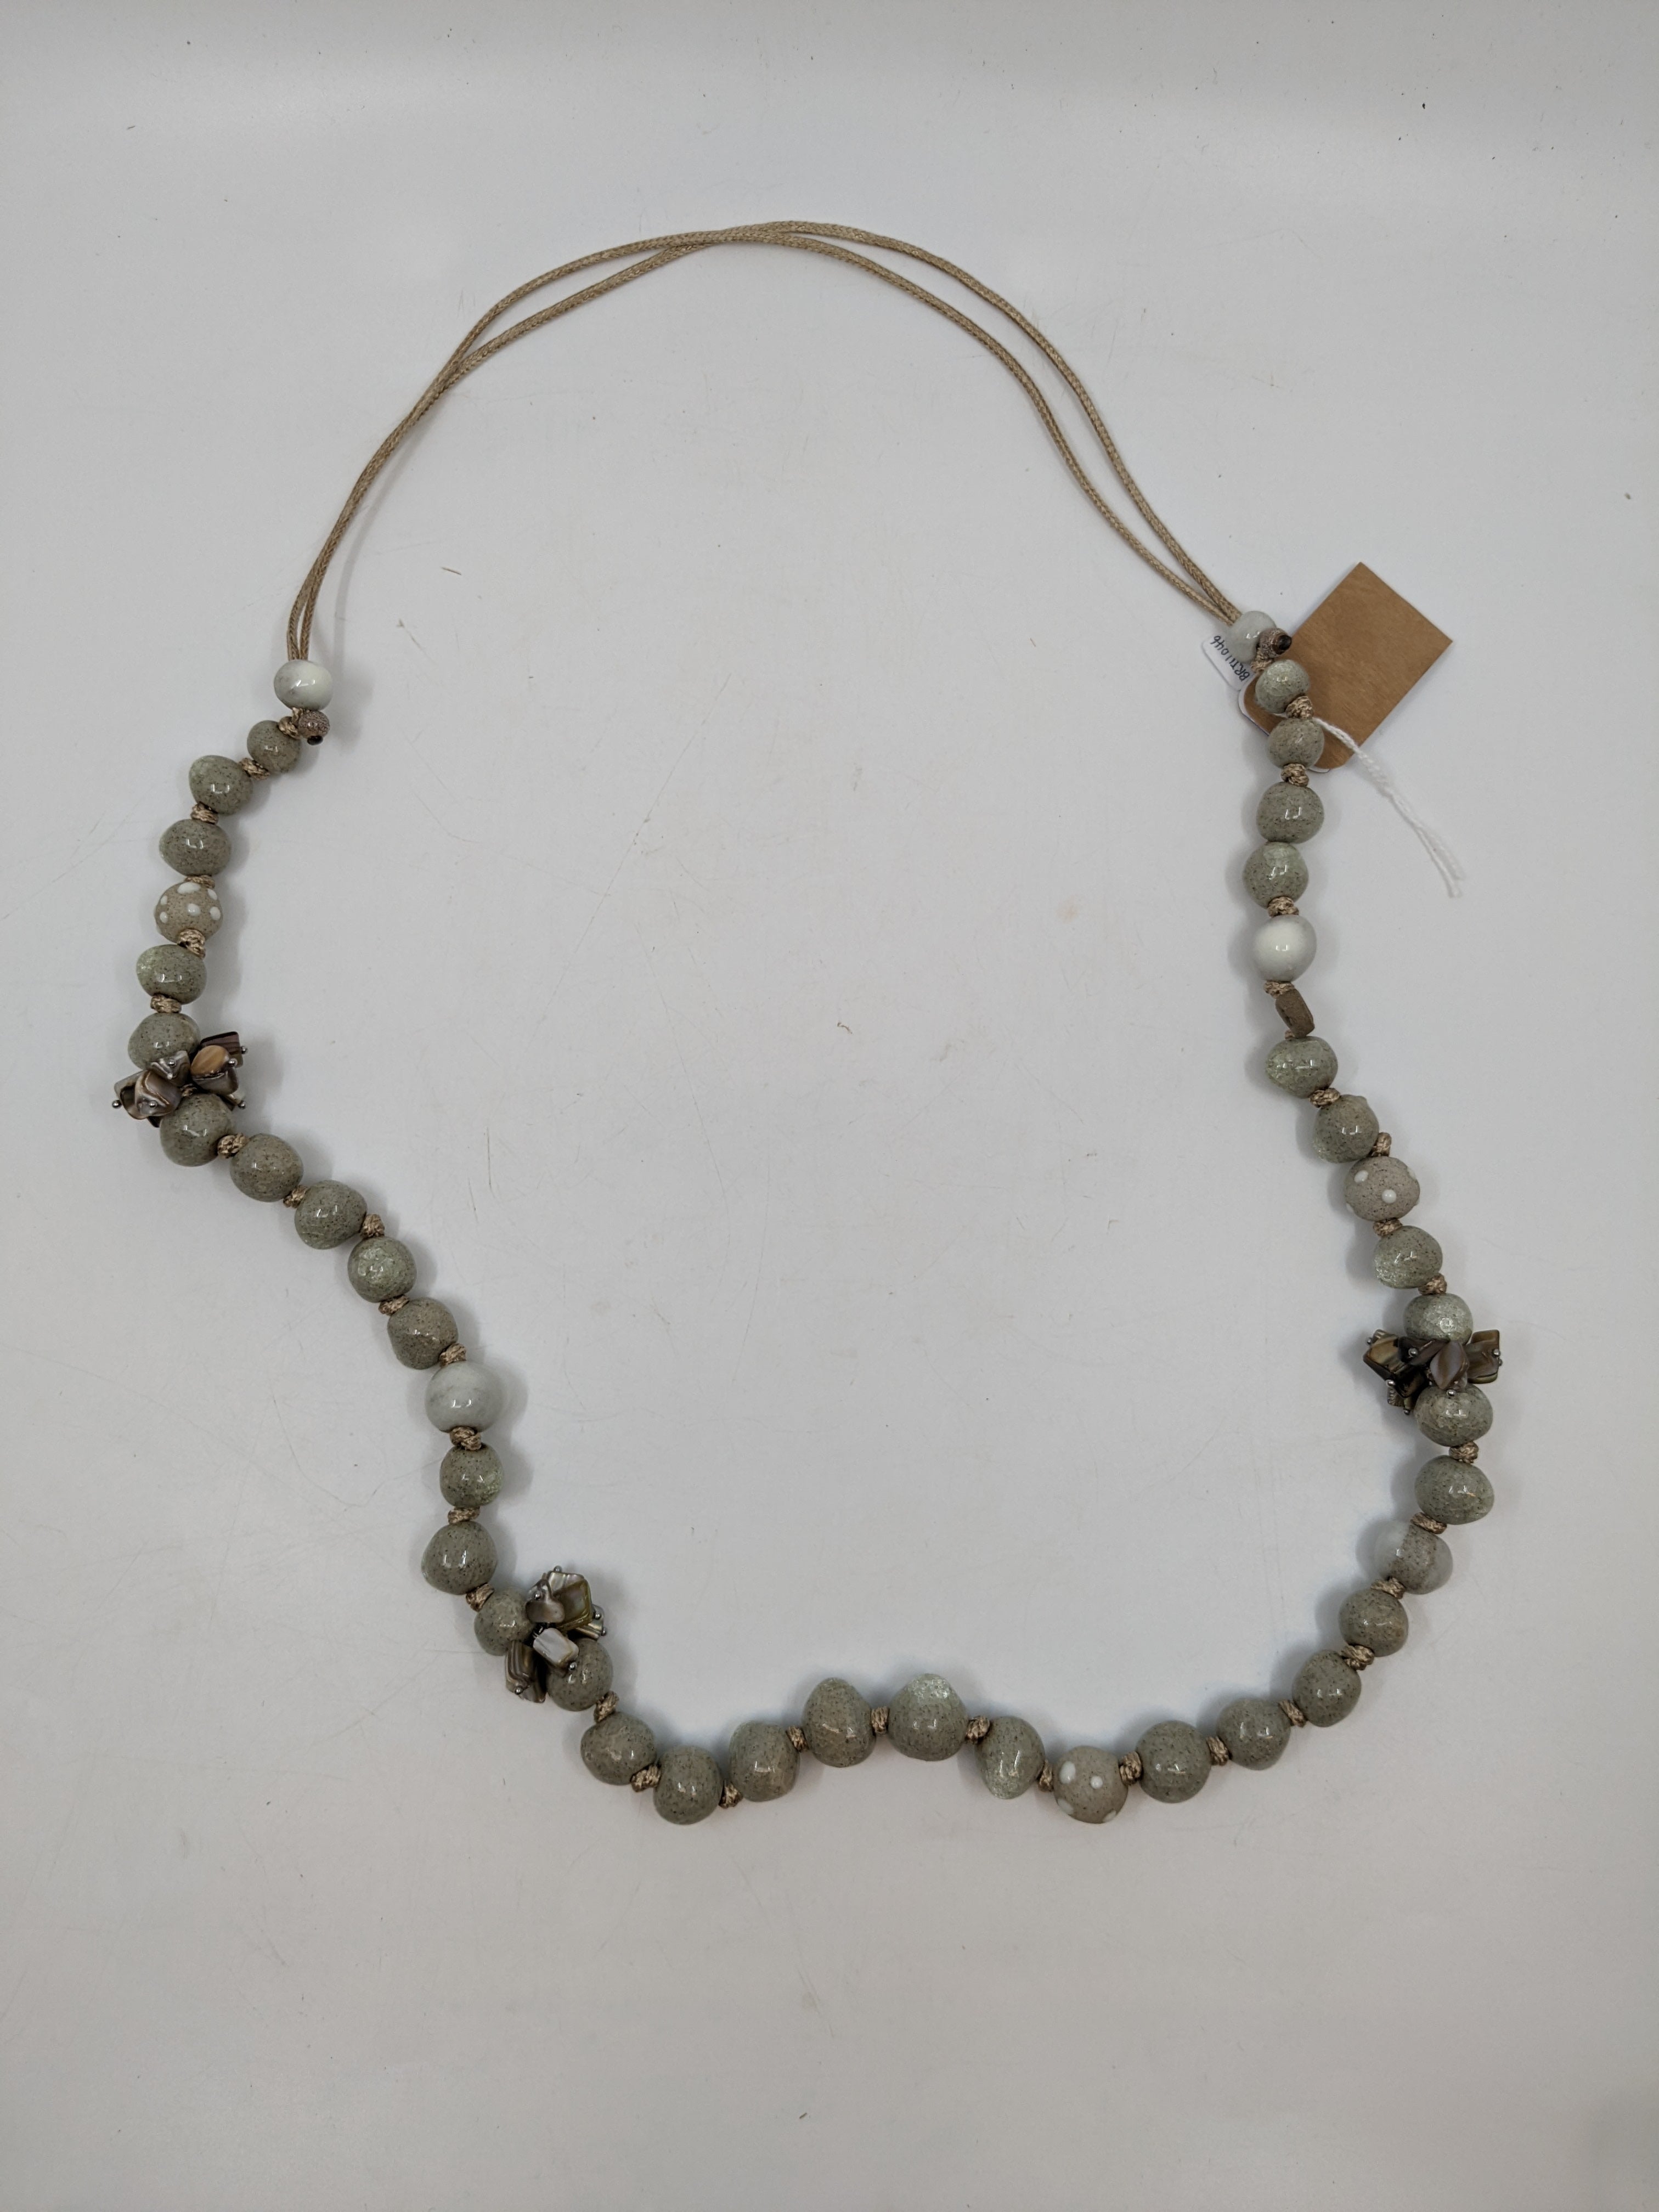 Long Bead Necklace with Shells Ceramics Julia Bramich 